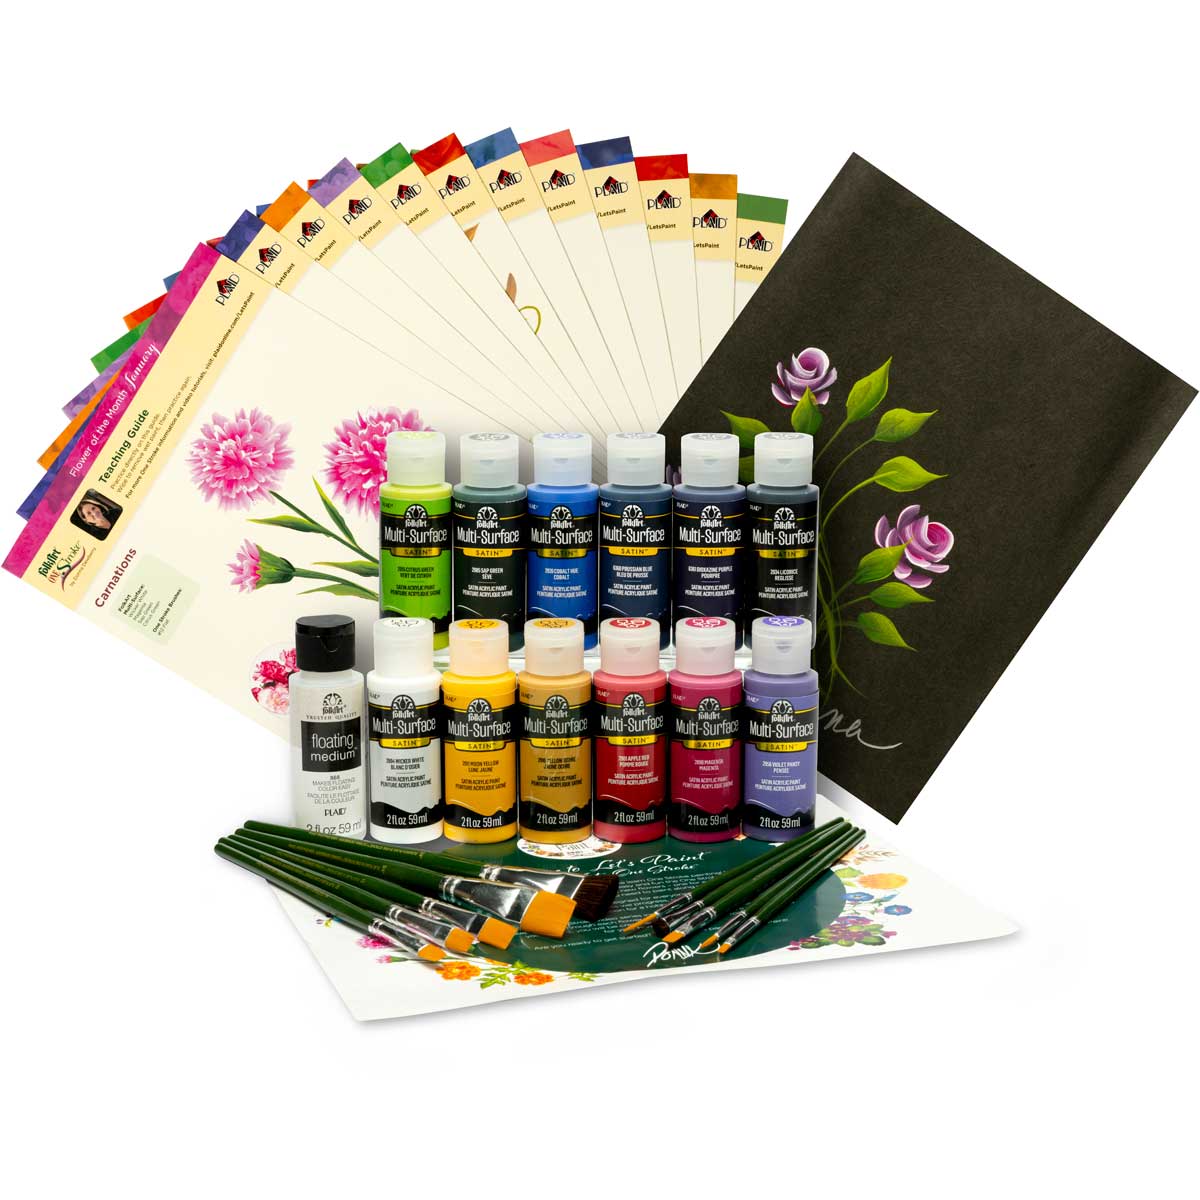 Let’s Paint with FolkArt ® One Stroke™ Kit - Flower of the Month - 99228